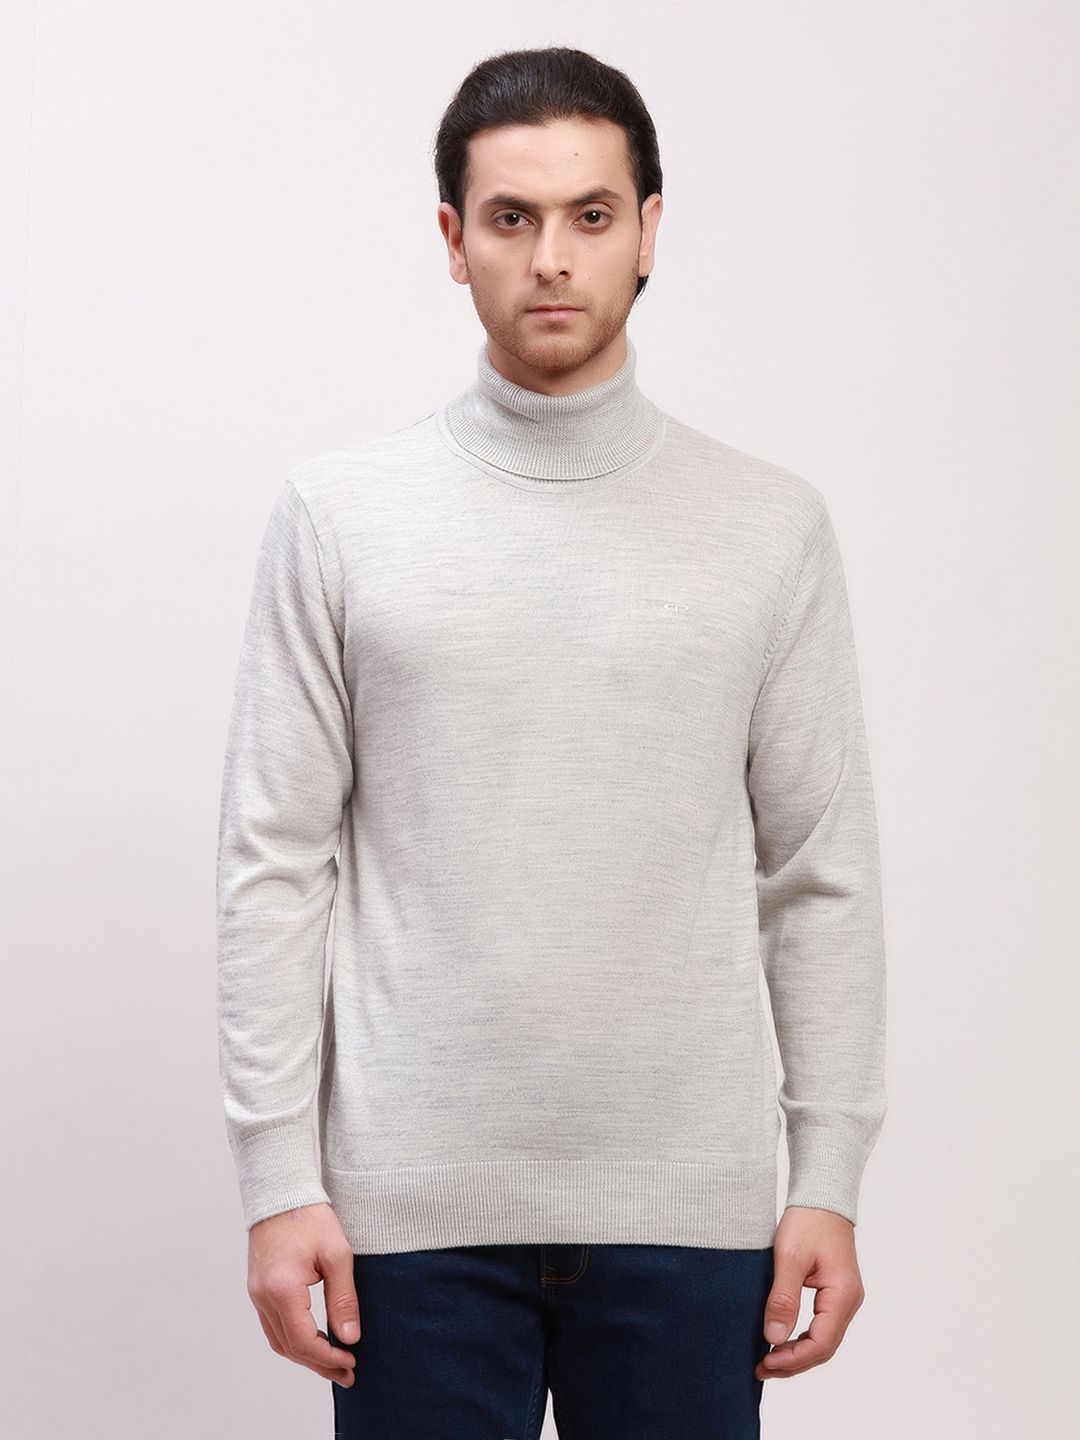     			Colorplus Acrylic High Neck Men's Full Sleeves Pullover Sweater - Grey ( Pack of 1 )